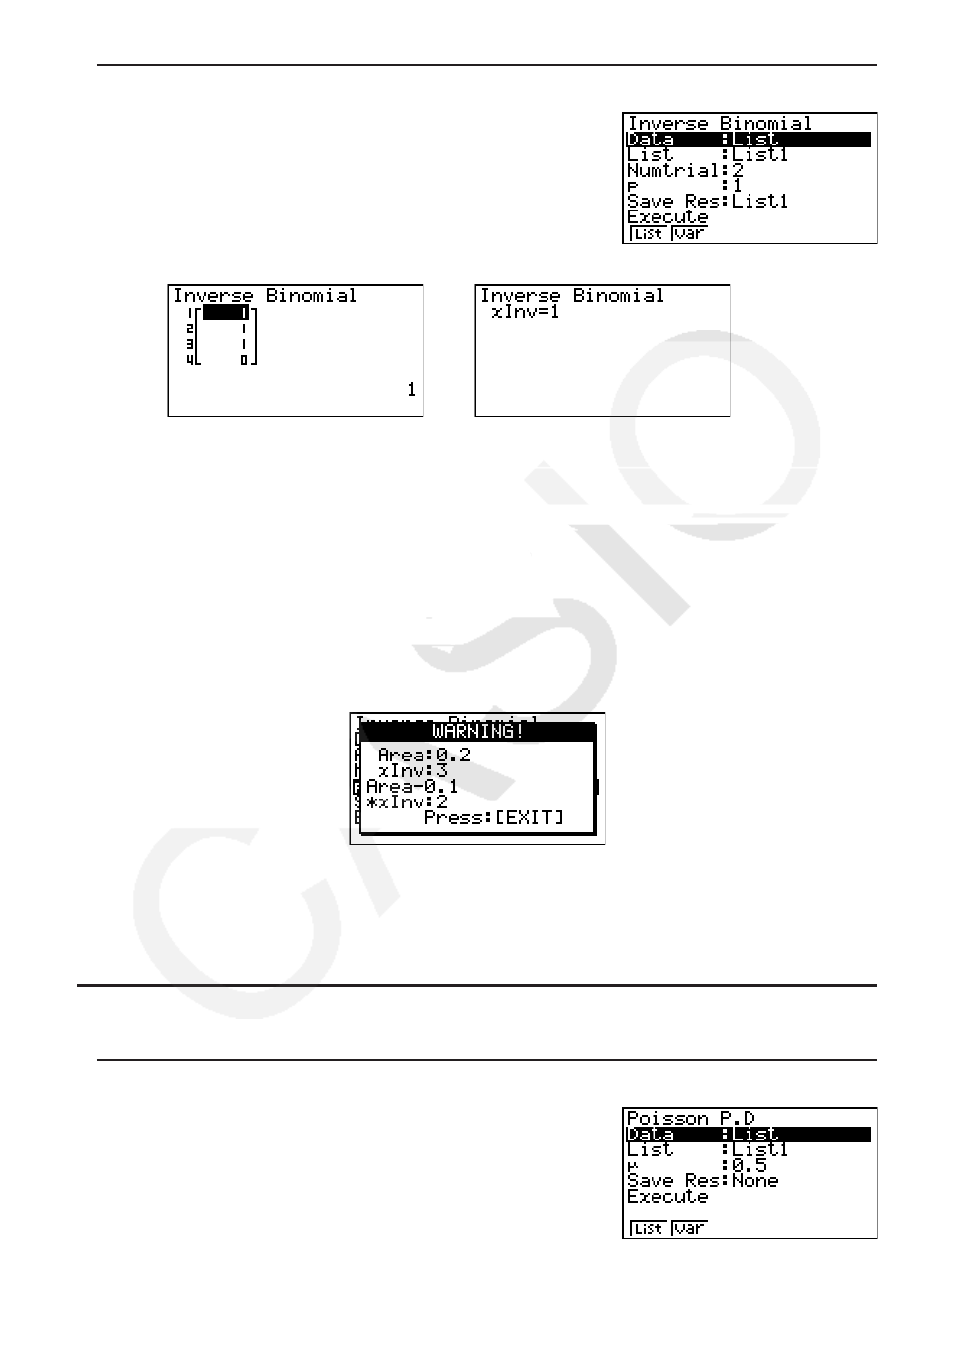 Casio FX-9750GII User Manual | Page 190 / 411 | Also for: fx-9860G AU PLUS,  FX-9860G, fx-9860G SD, FX-9860GII, fx-9860GII SD, fx-9860G AU, FX-7400GII